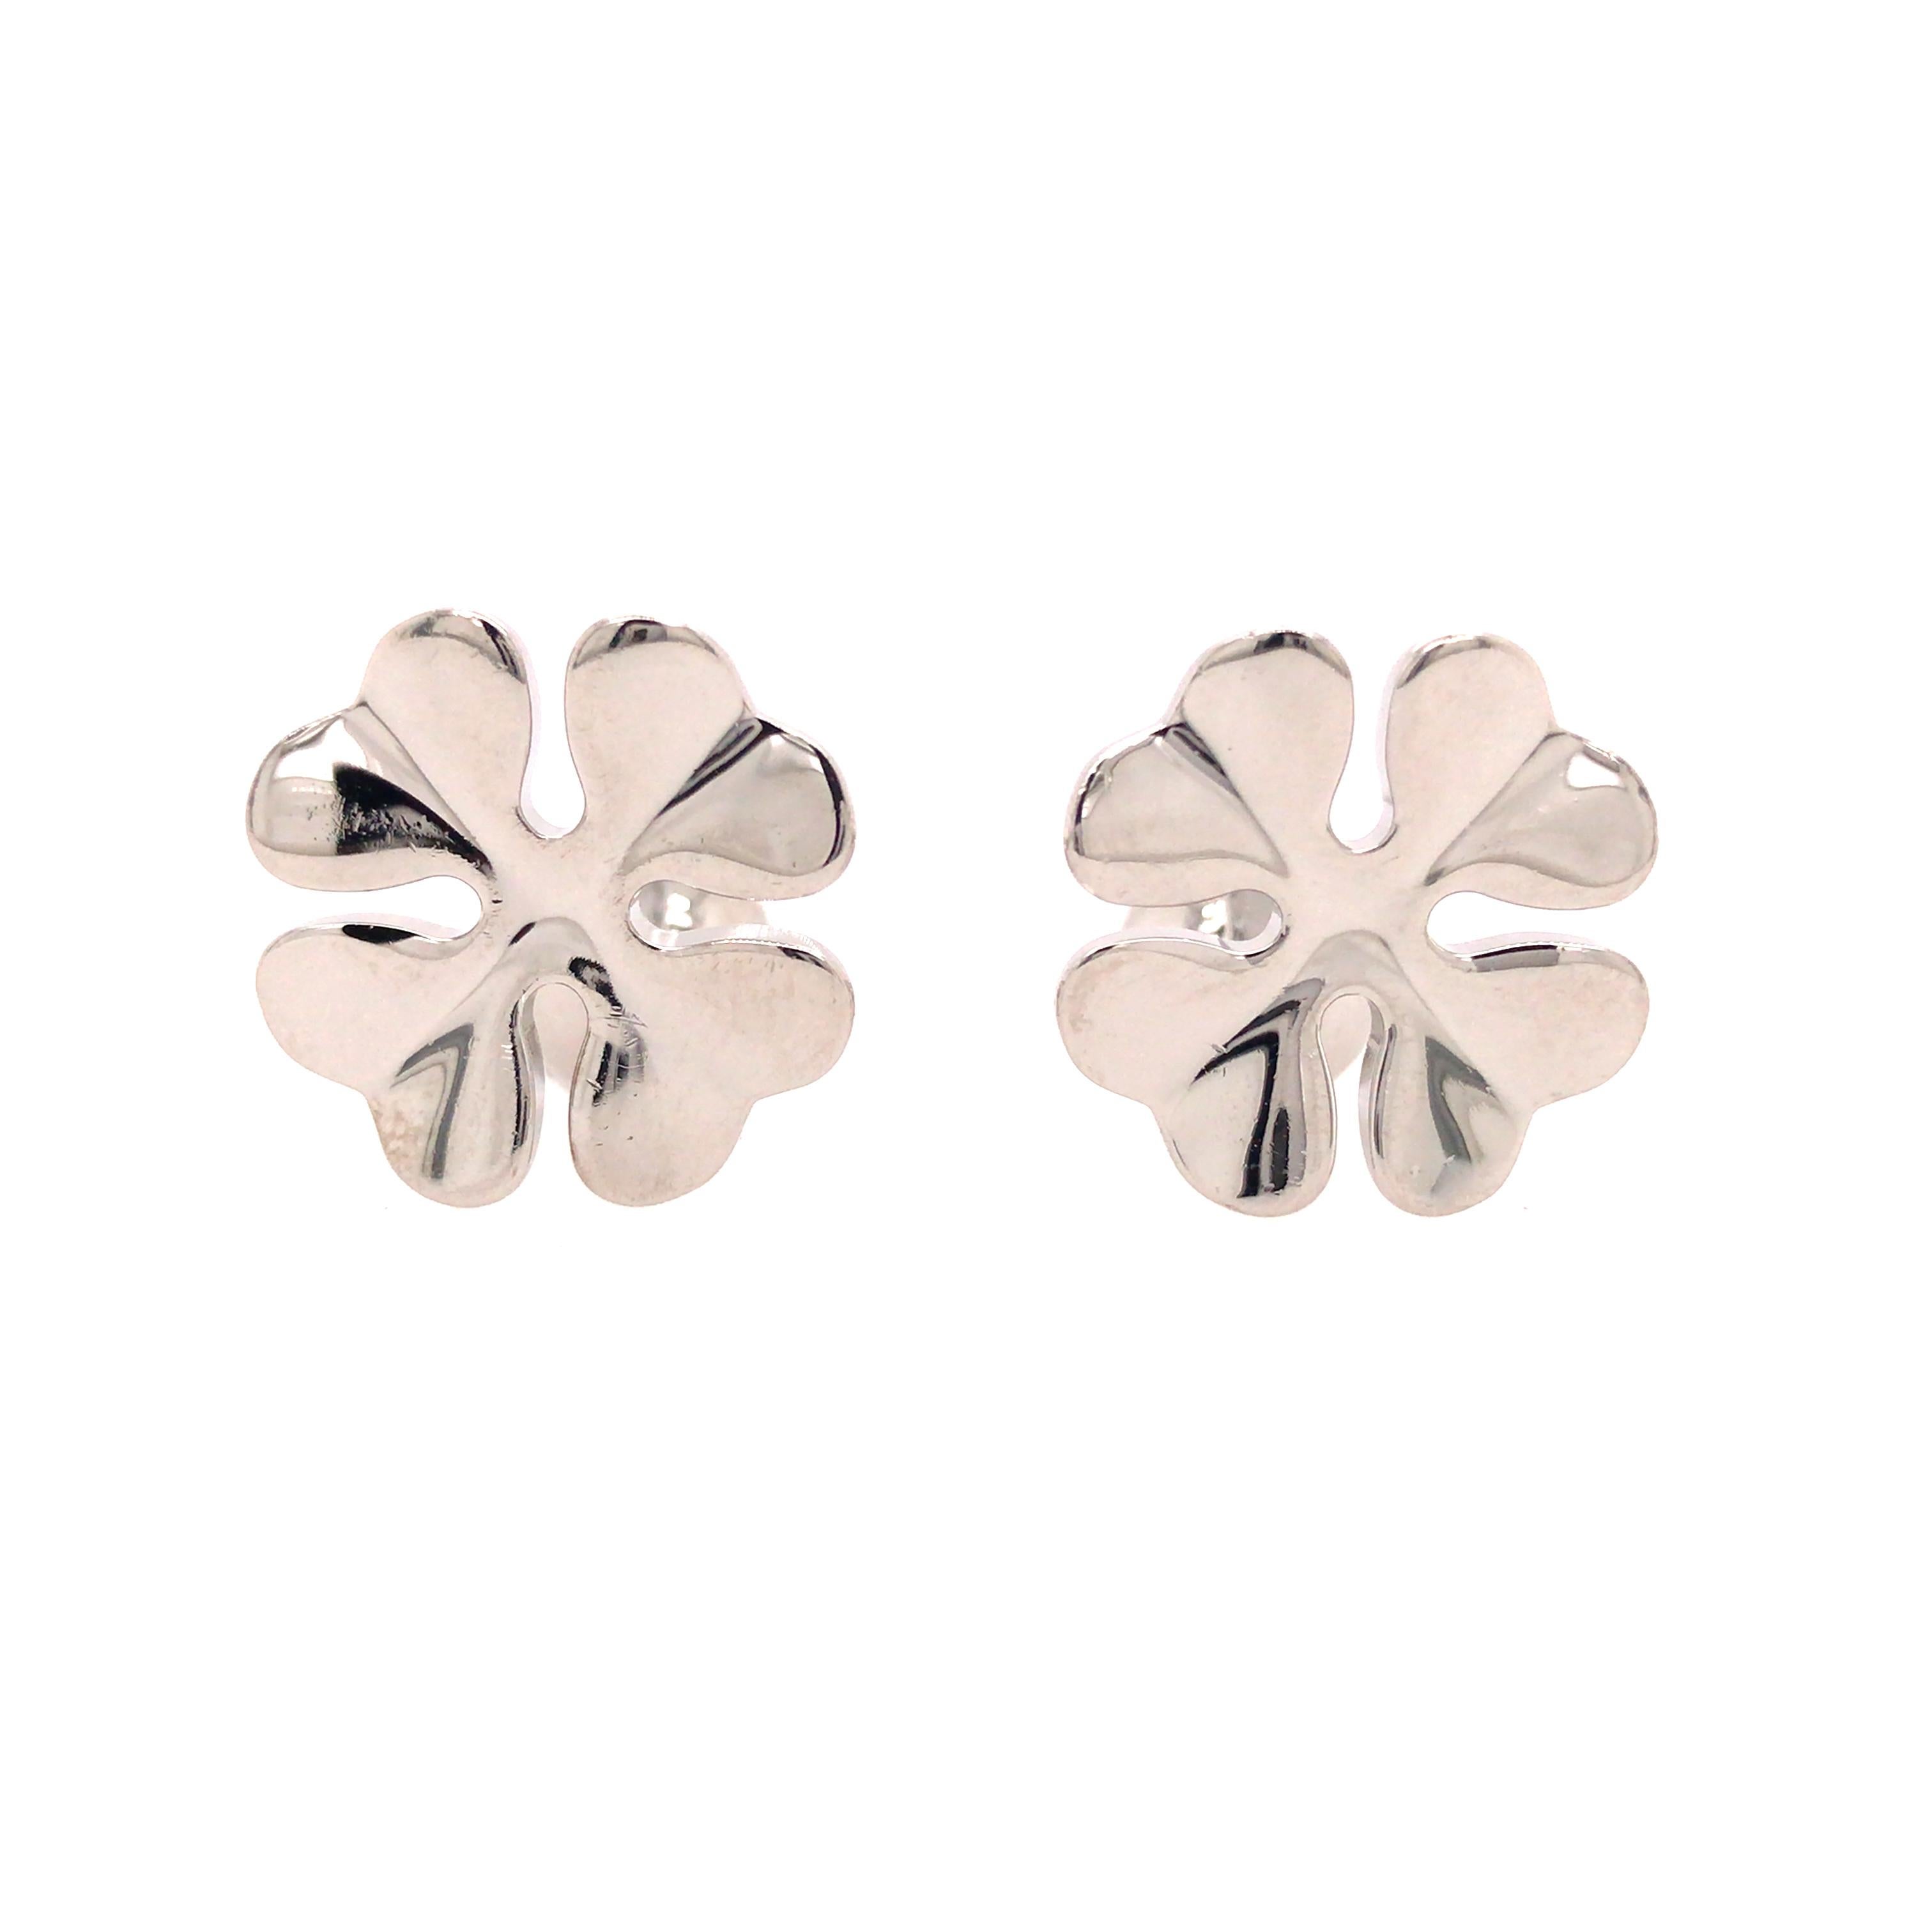 Cartier Four Leaf Clover Cuff Links in Sterling Silver.  The Cuff Links measure 3/4 inch in length and 5/8 inch in width at the top. 14.1 grams. Inscribed 